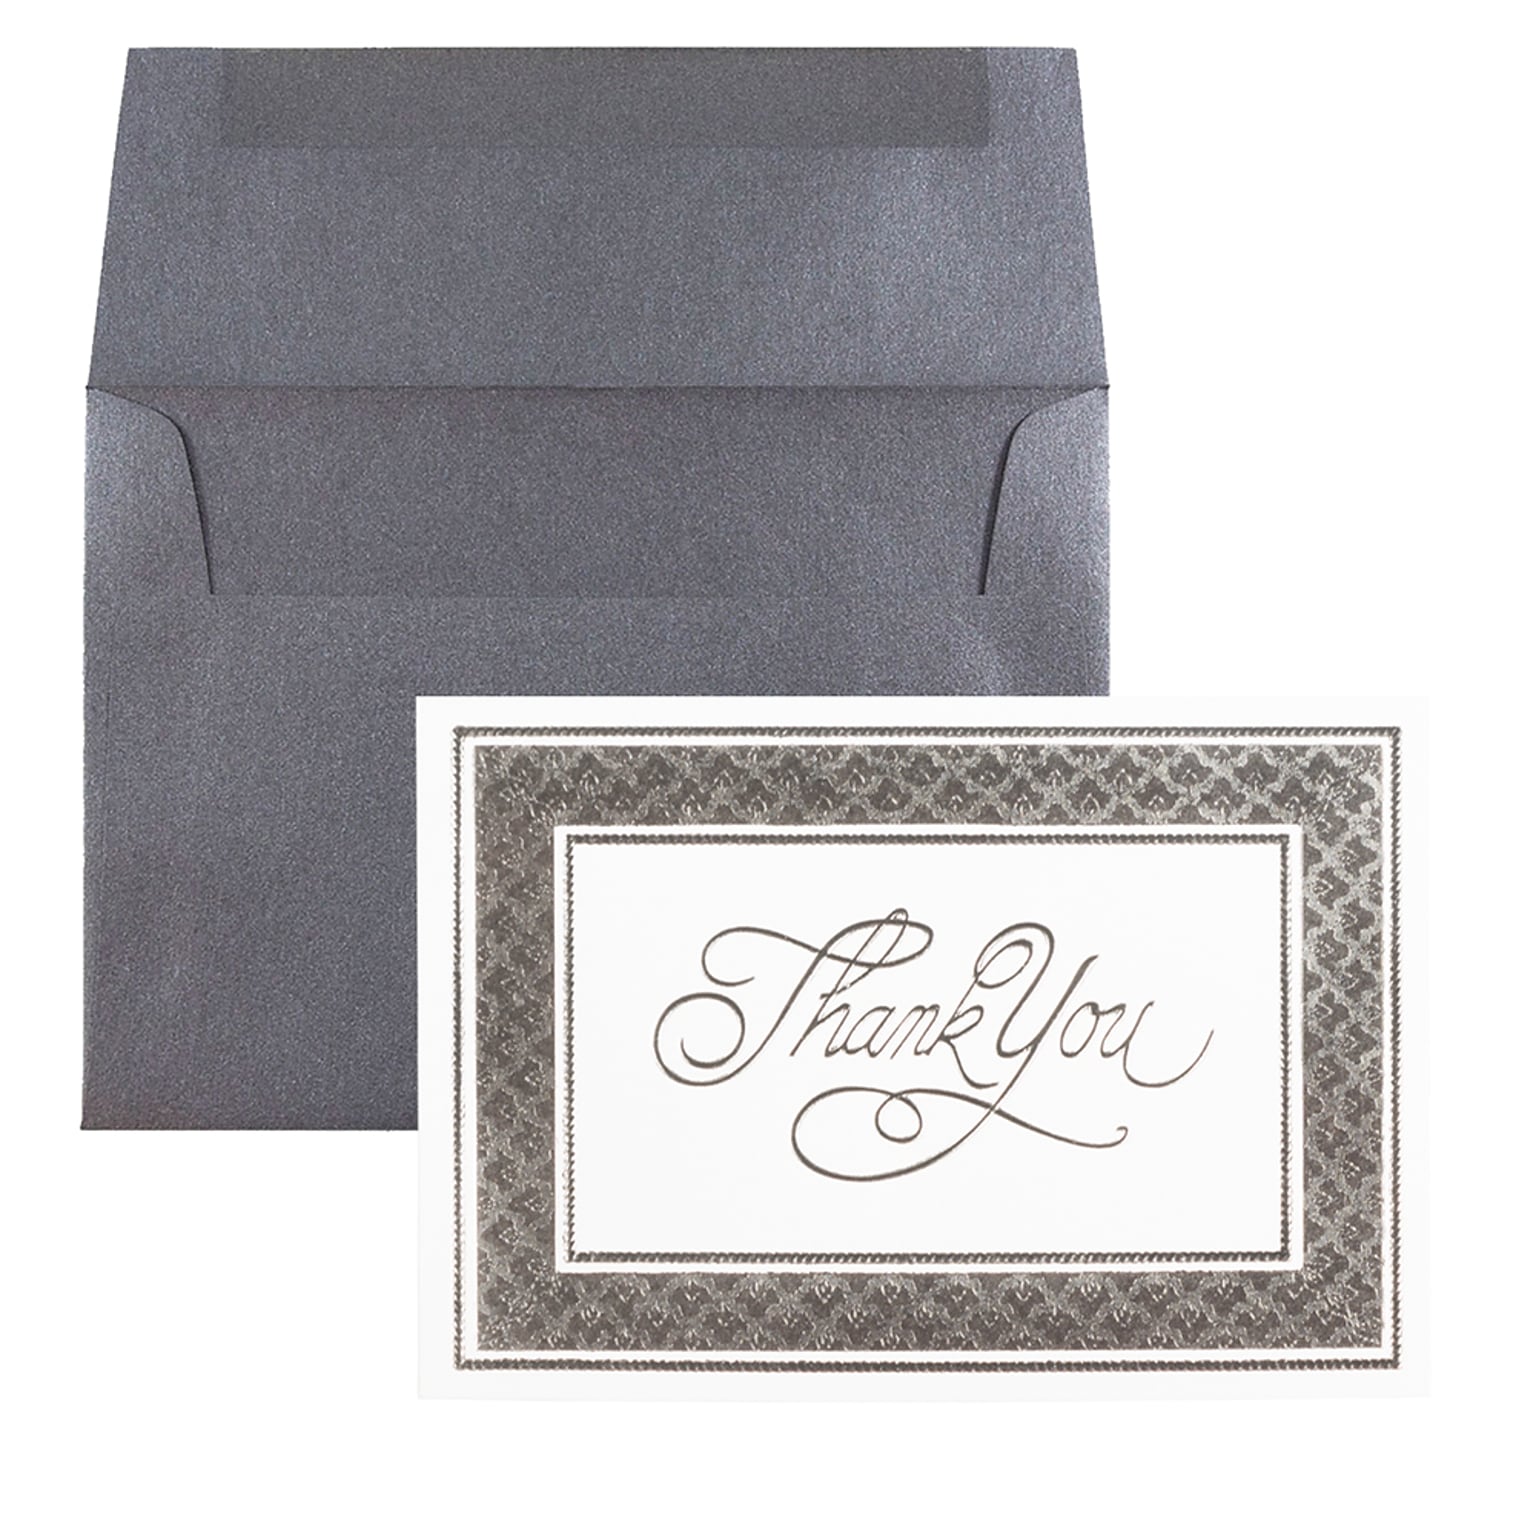 JAM Paper® Thank You Card Sets, Silver Border Cards with Anthracite Stardream Envelopes, 25 Cards and Envelopes (526M1122MB)